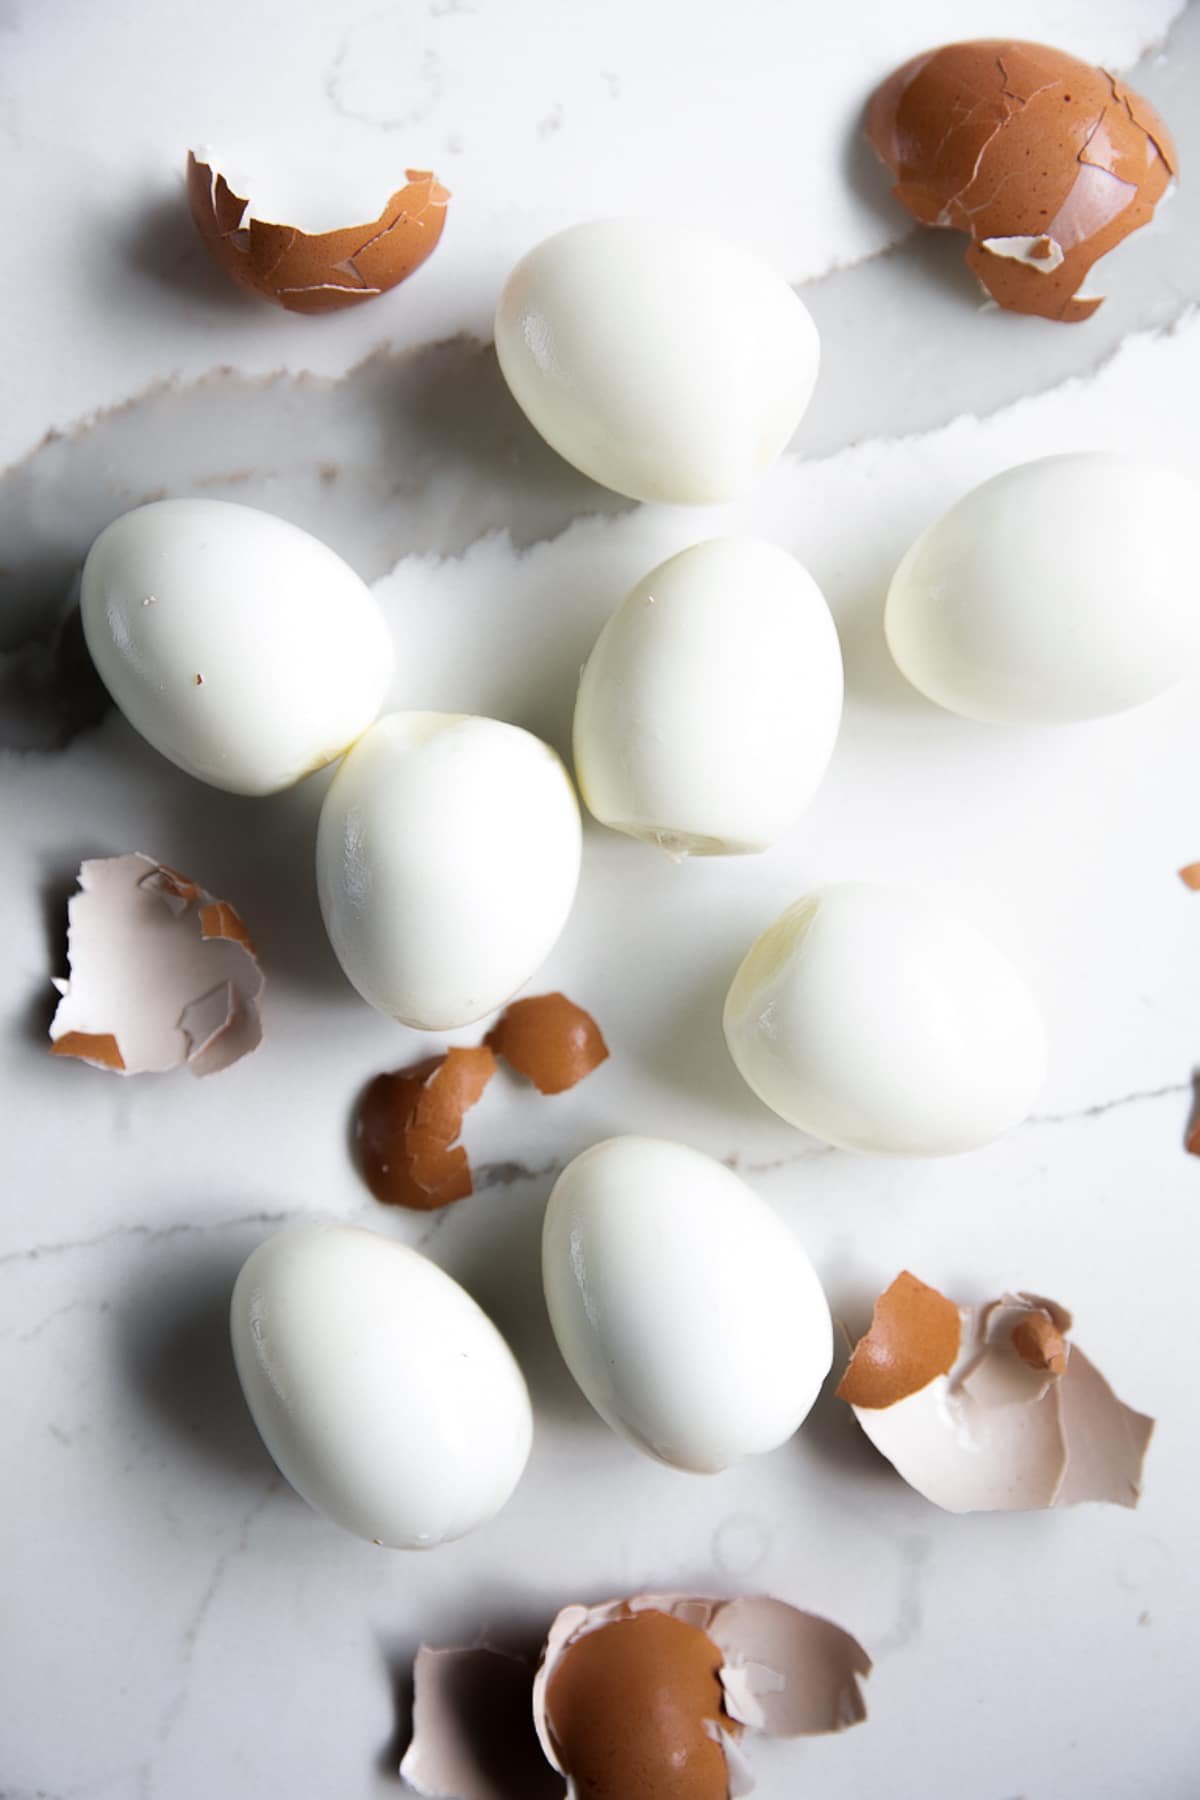 Eight perfectly peeled hard boiled eggs without shells.